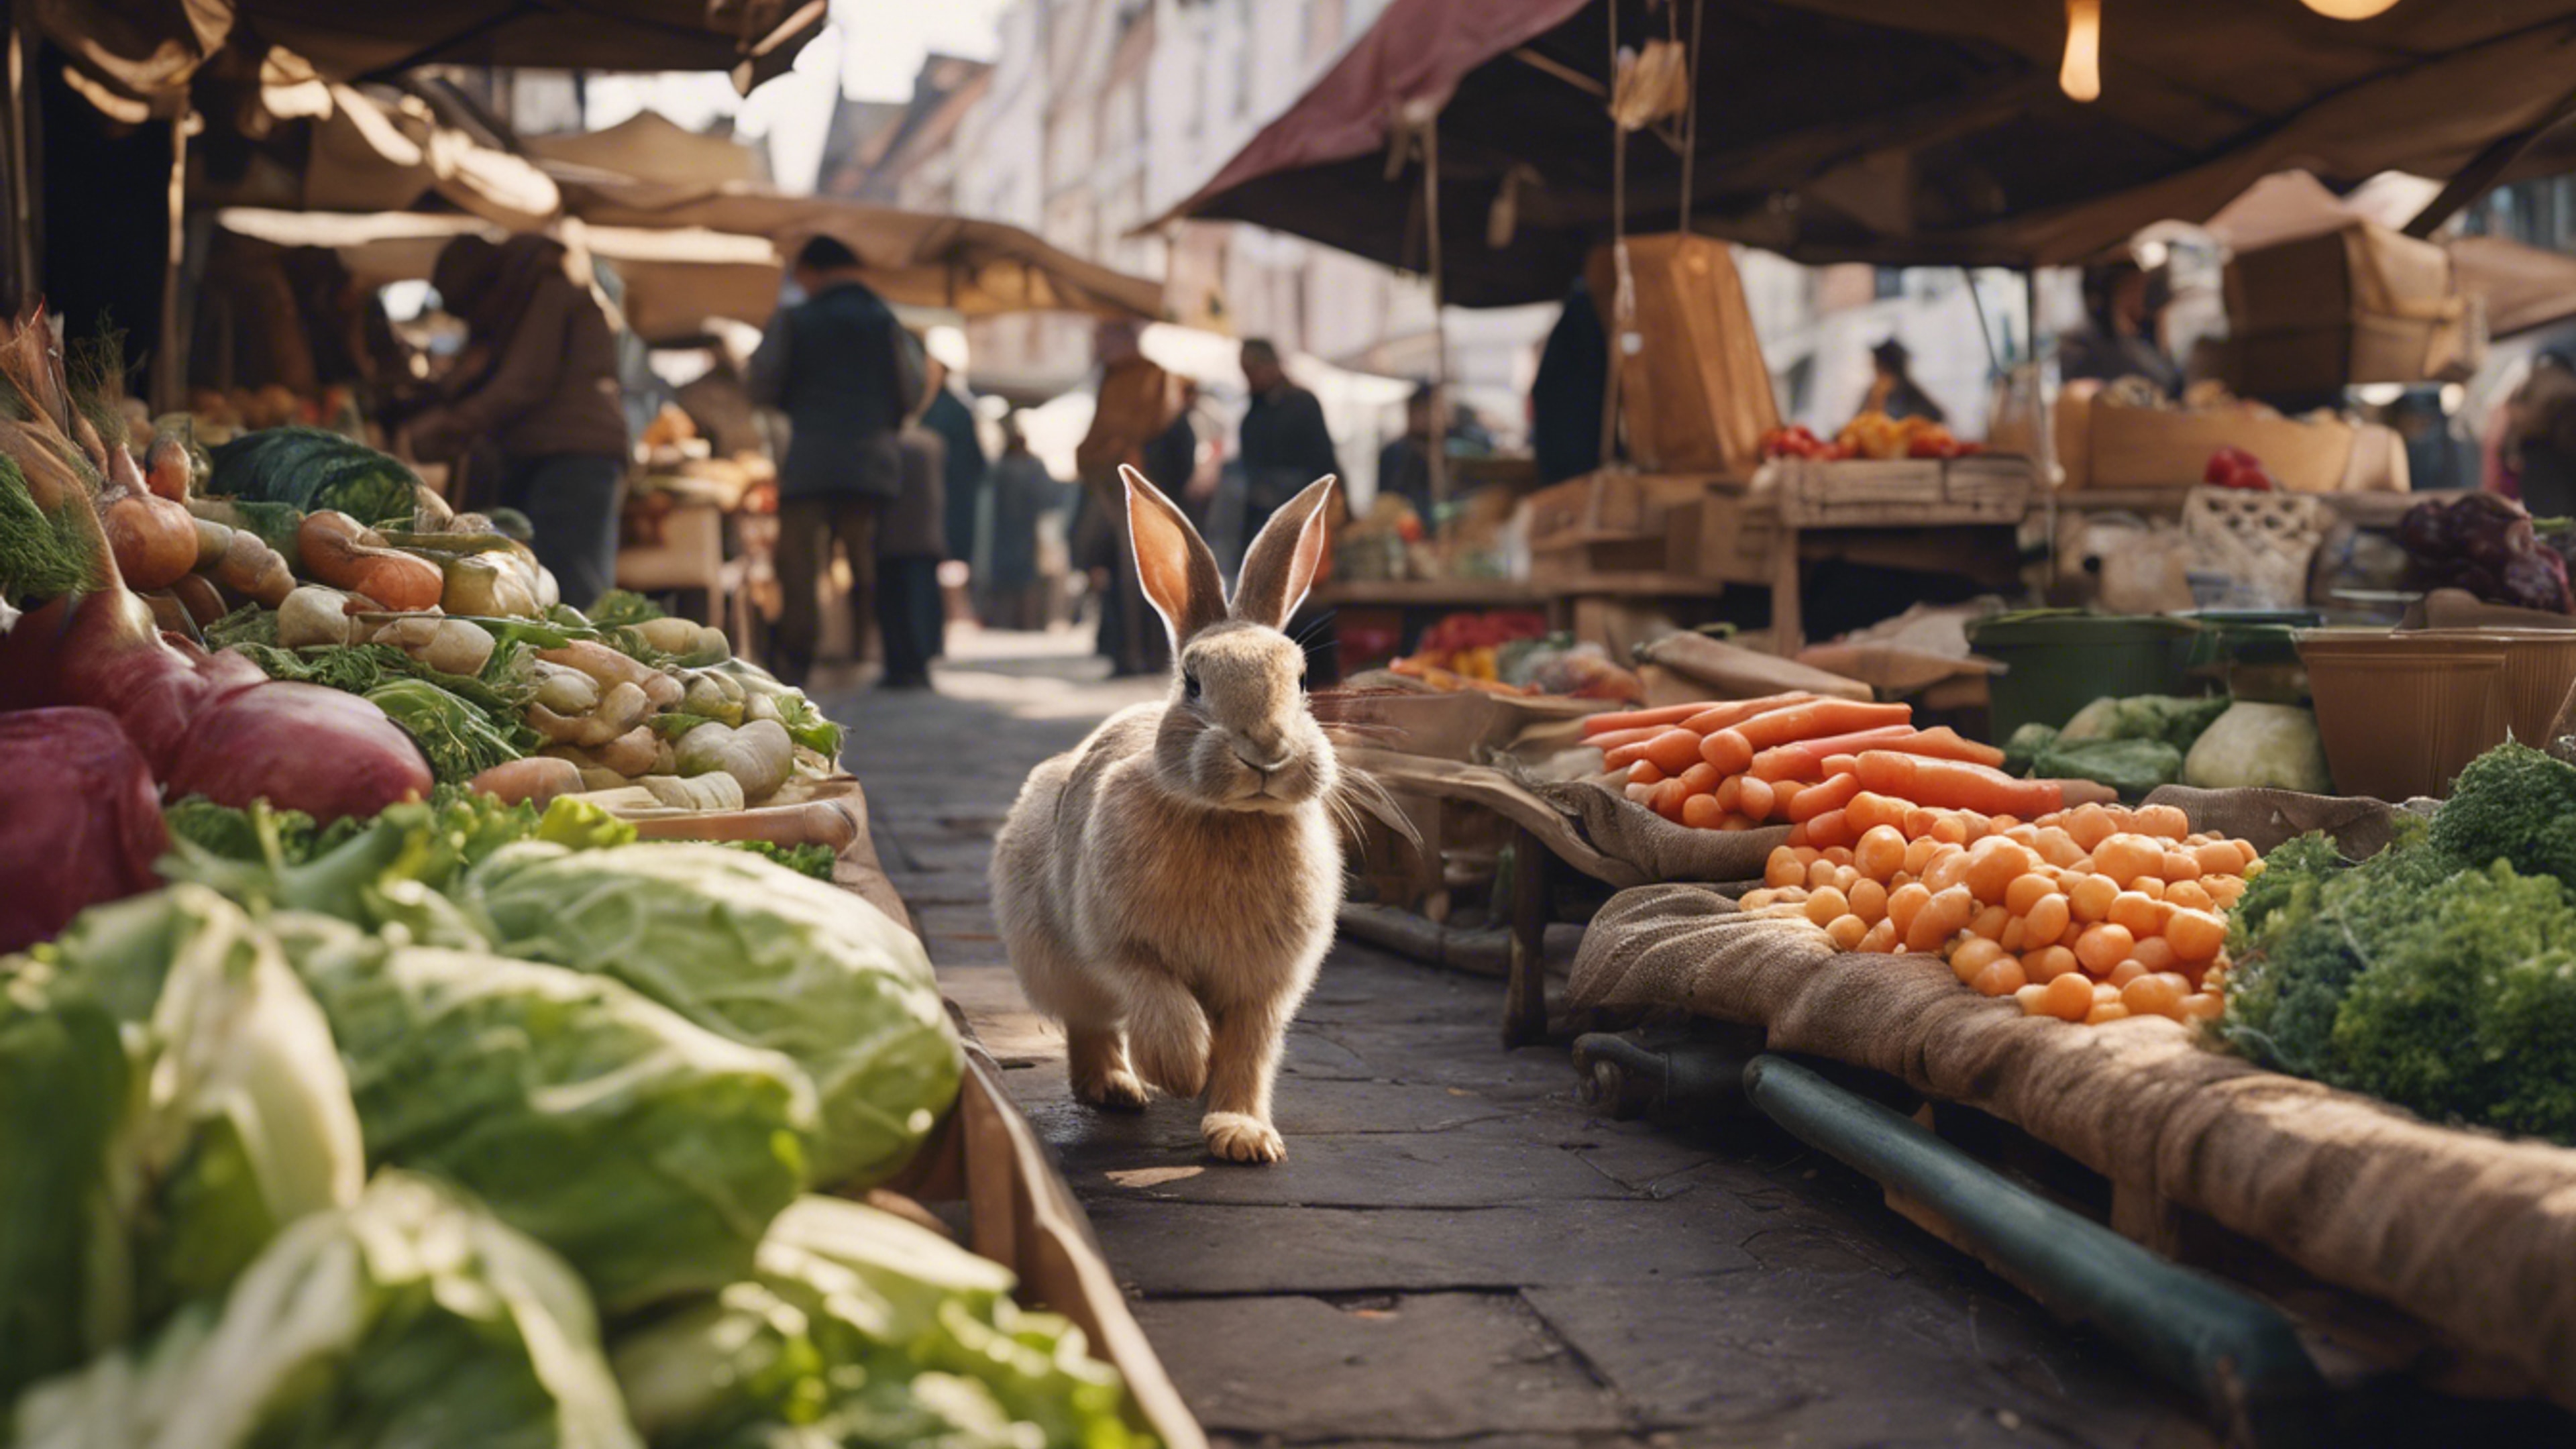 A rabbit running a vegetable stall in an old-fashioned market.壁紙[95b88699917c48c6bf62]